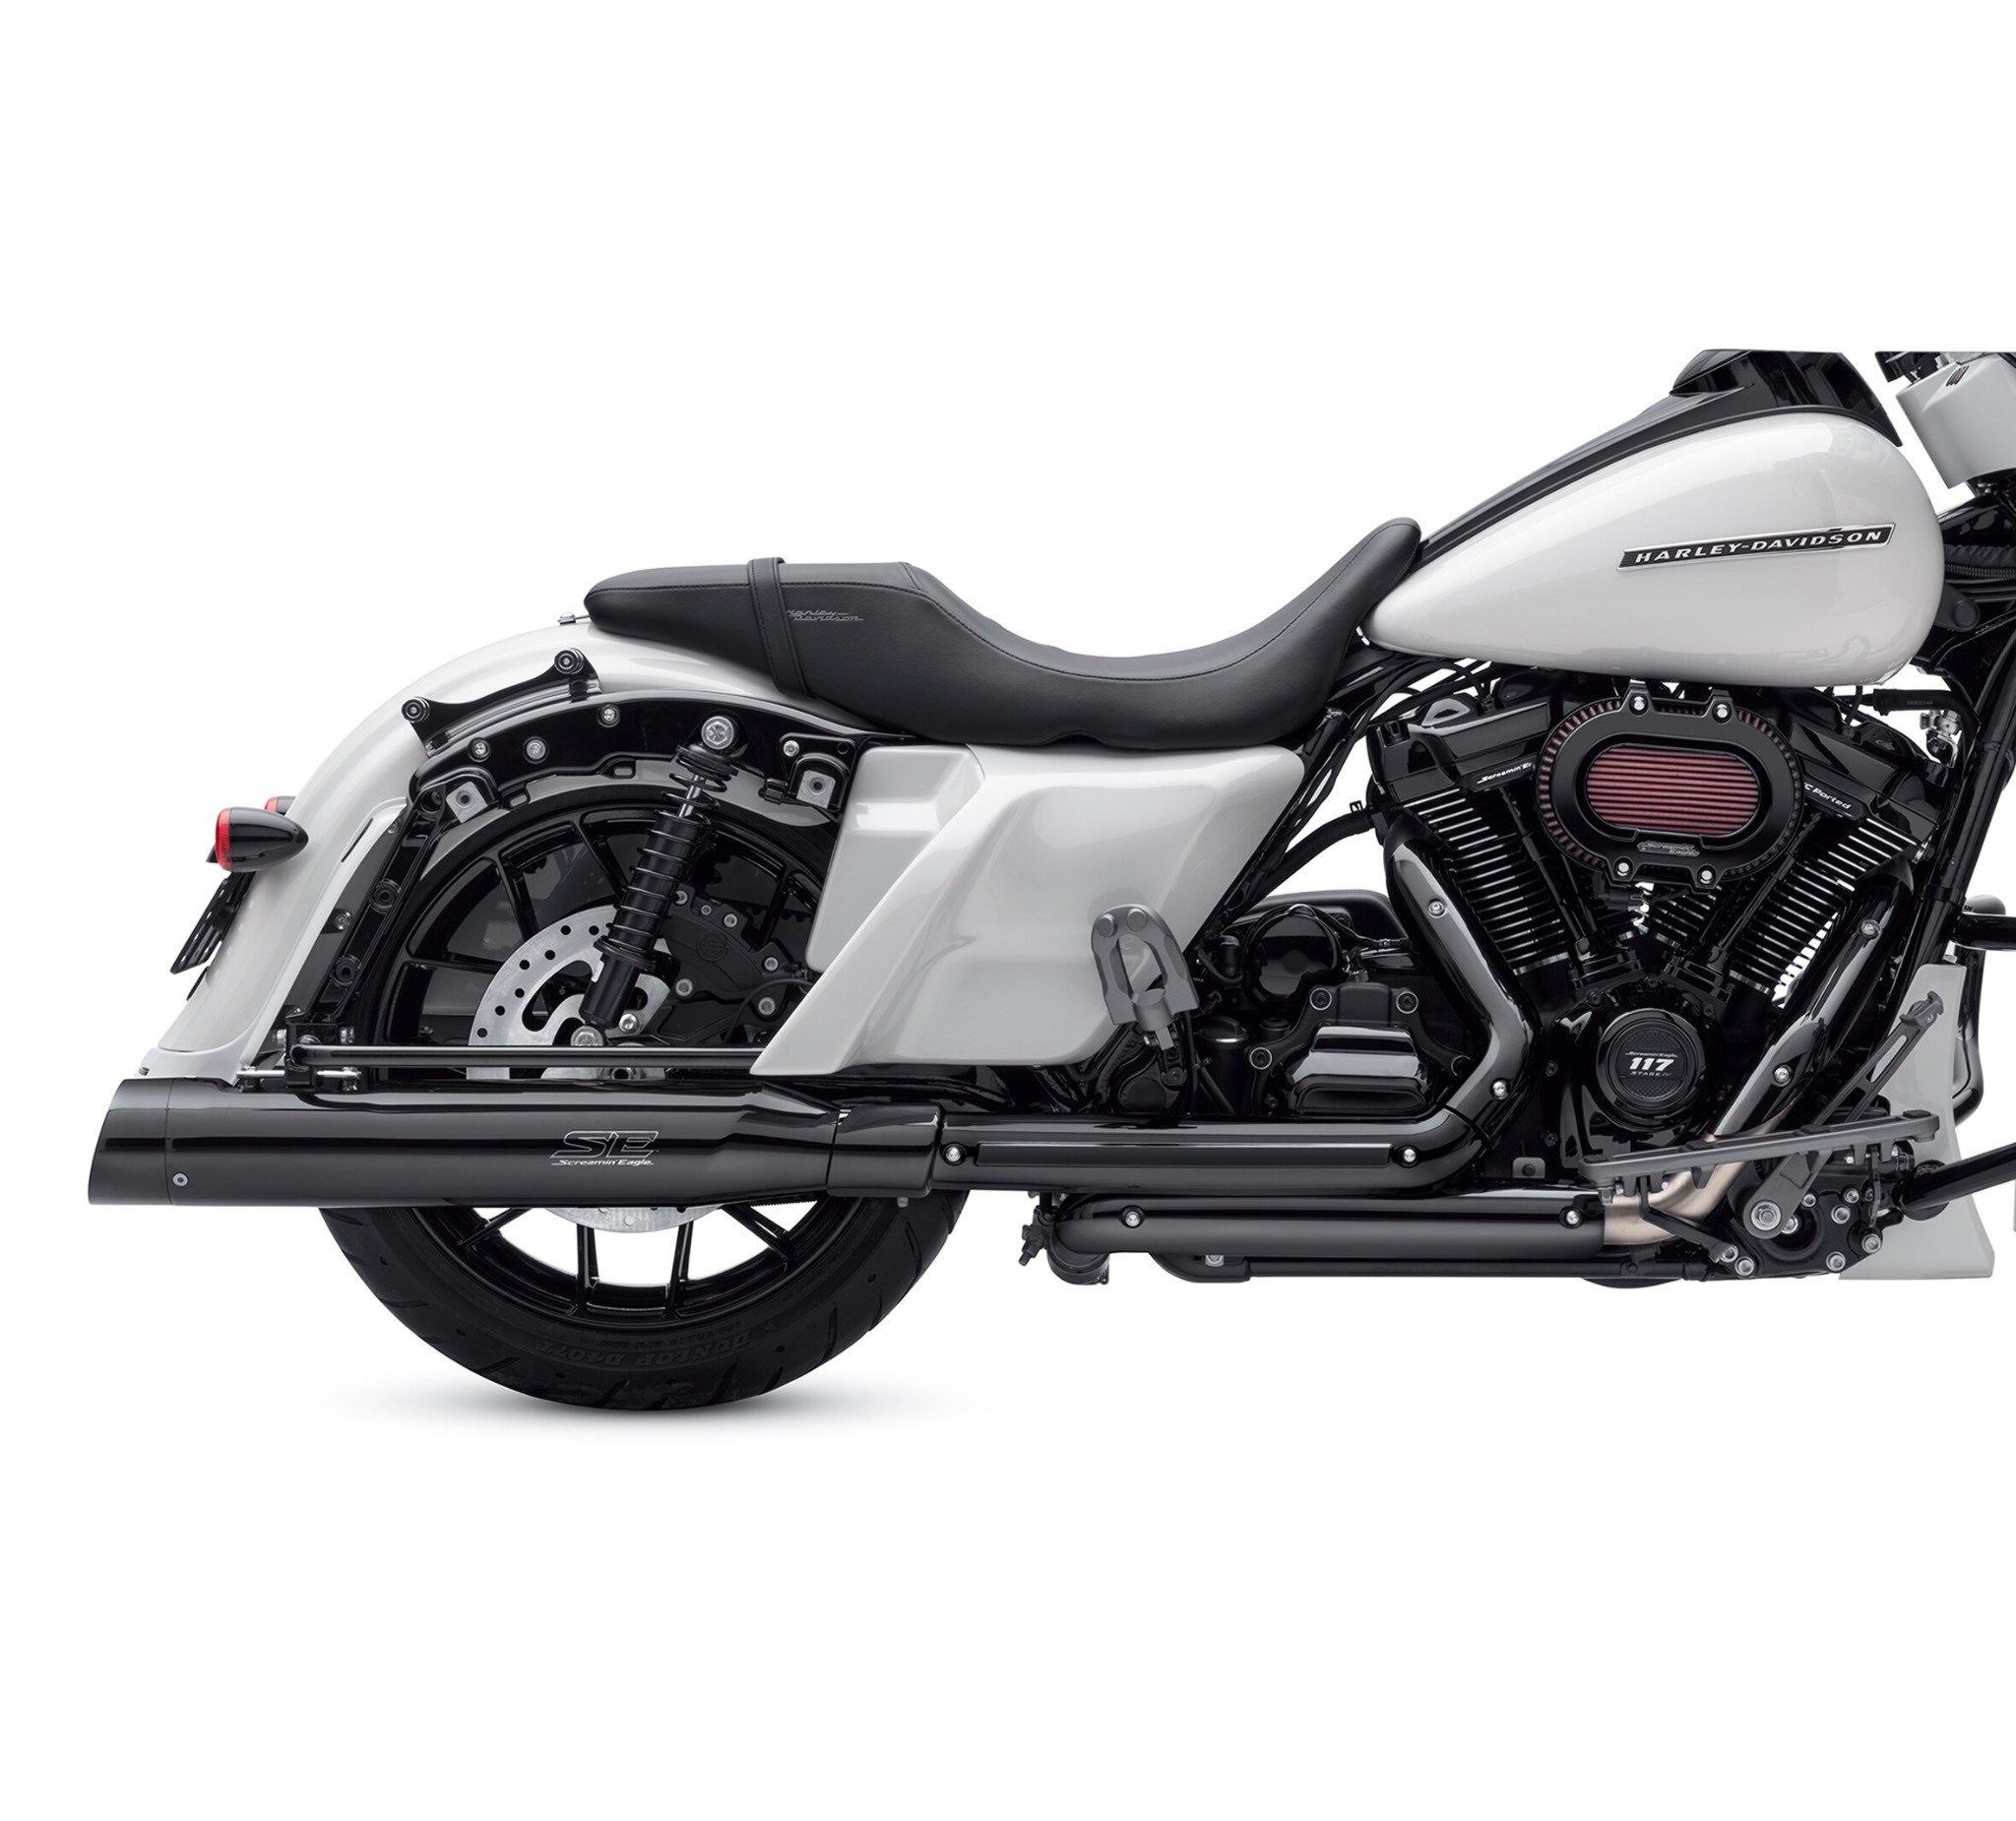 Screamin Eagle High Flow Exhaust System With Street Cannon Mufflers 65600330 Harley Davidson Usa